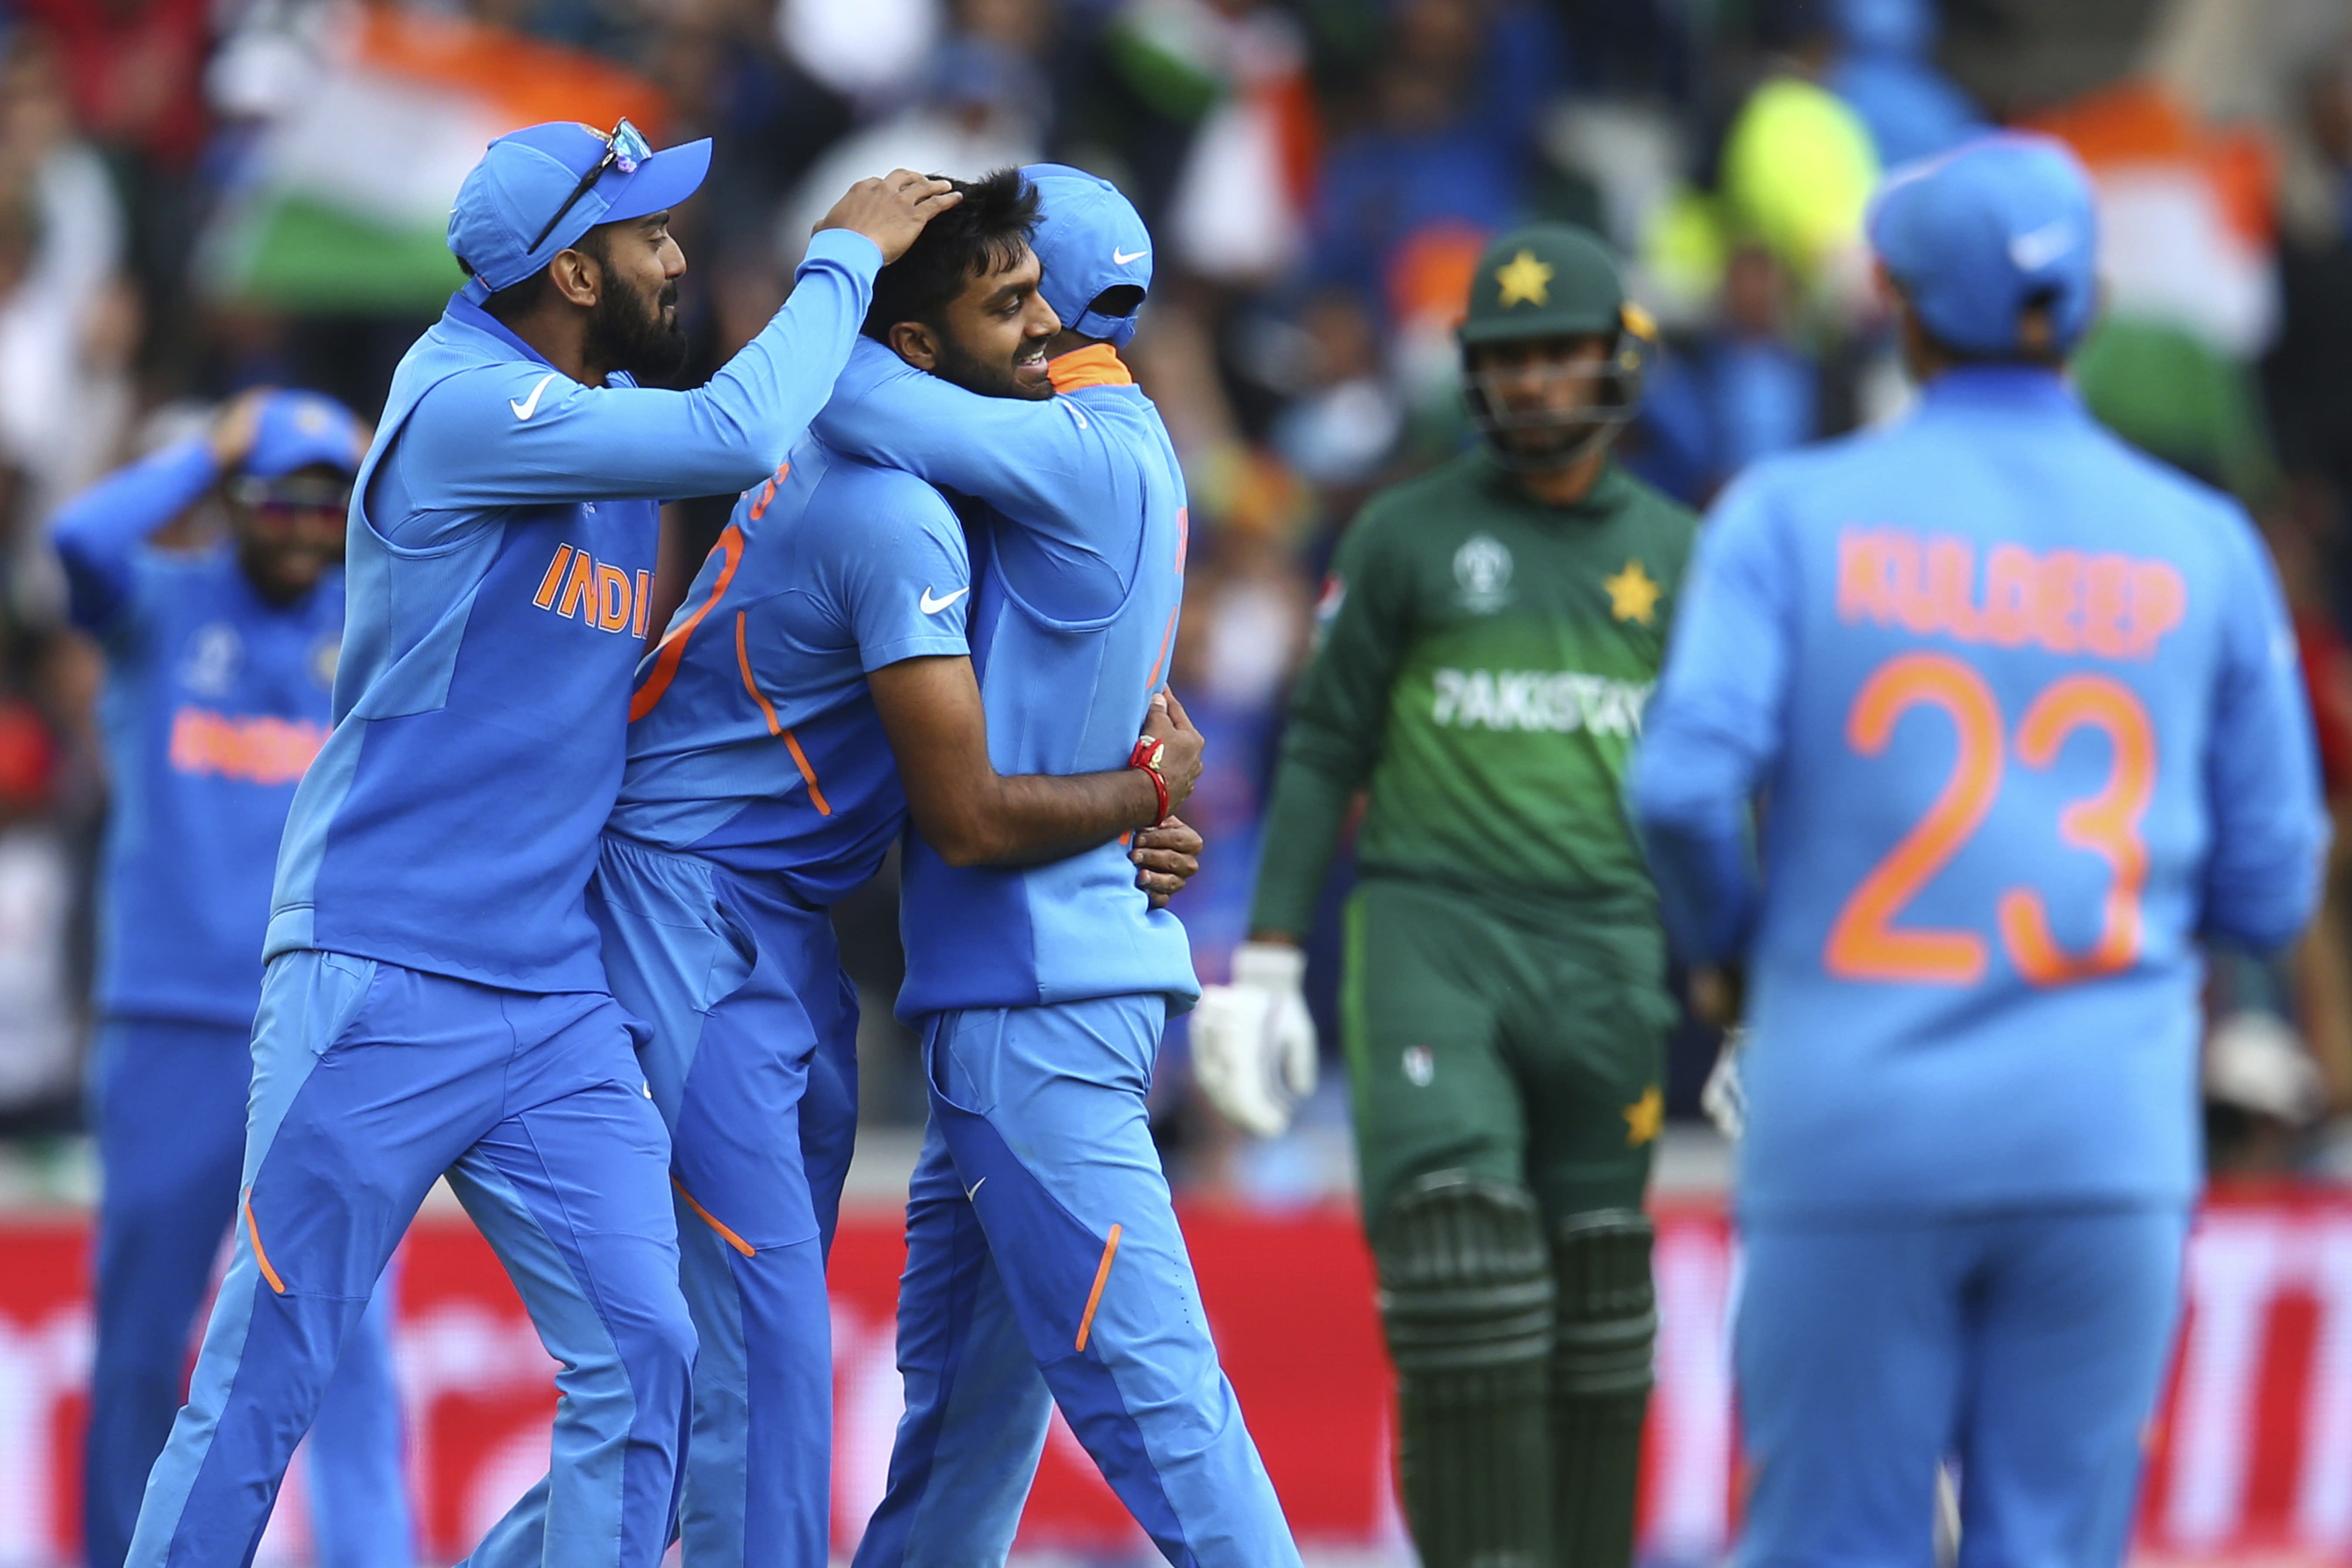 India beat Pakistan to maintain perfect World Cup record